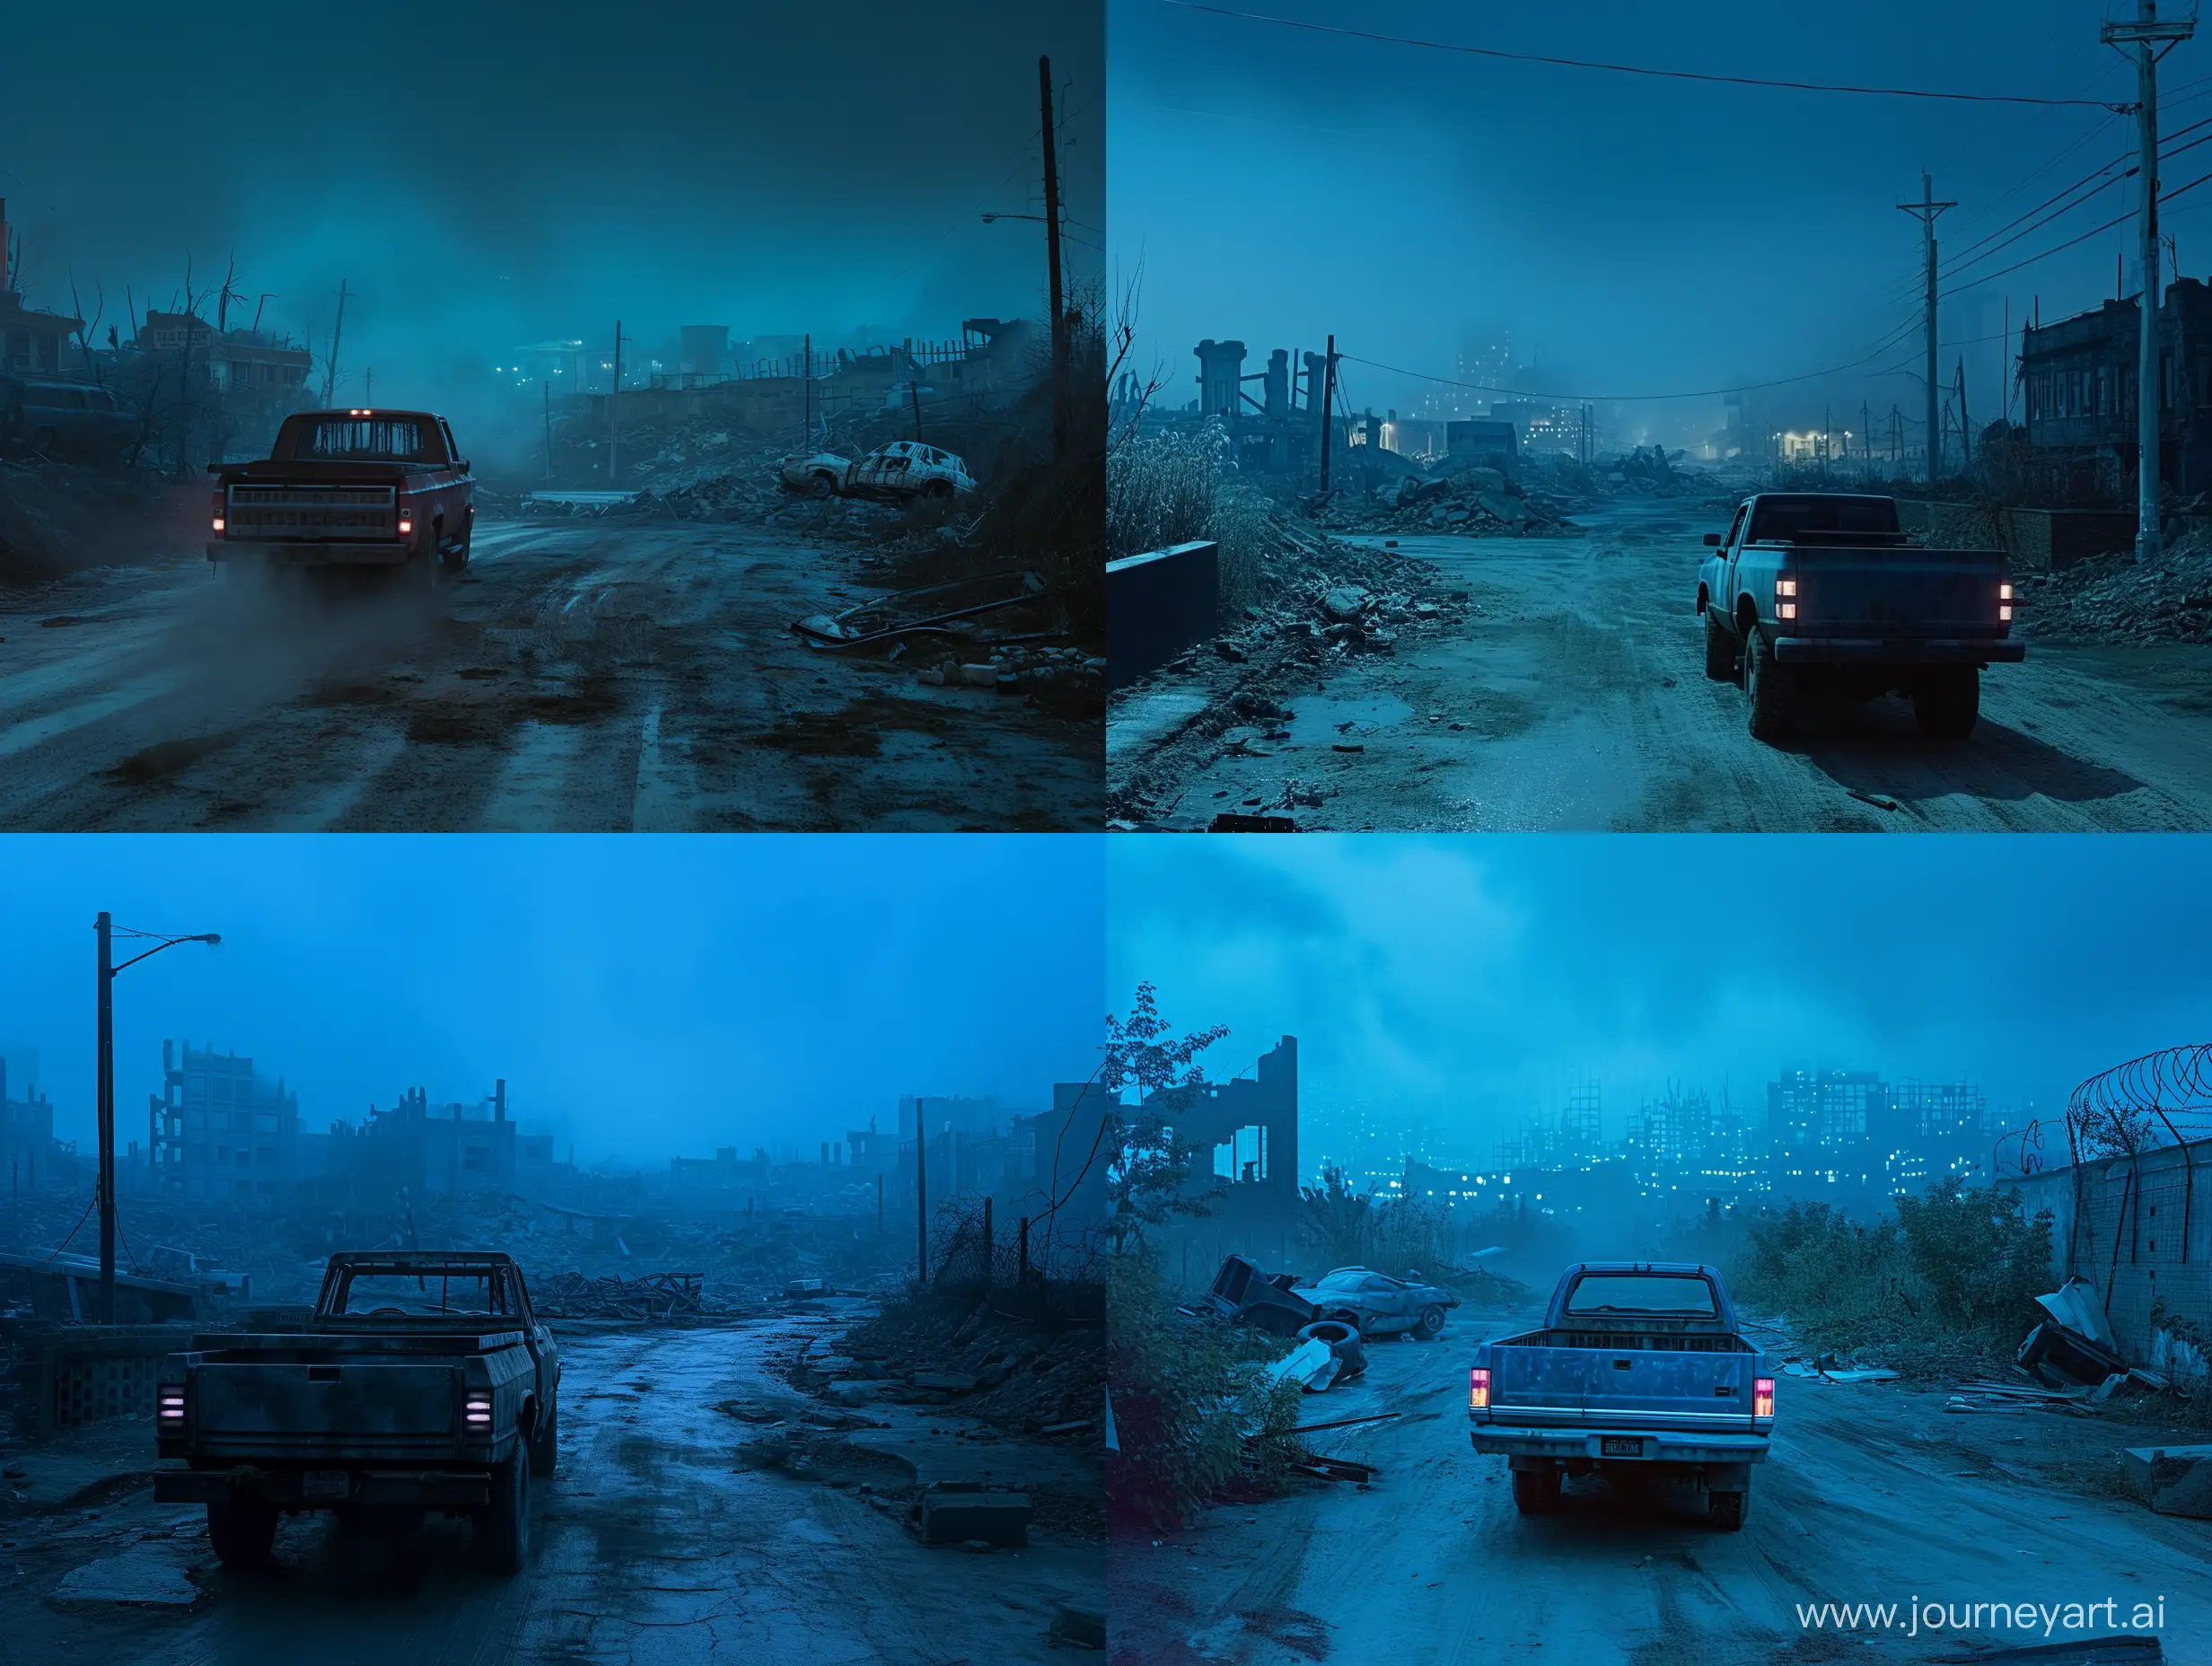 Apocalyptic-Cinematic-Scene-Truck-Drives-Through-Ruined-City-at-Night